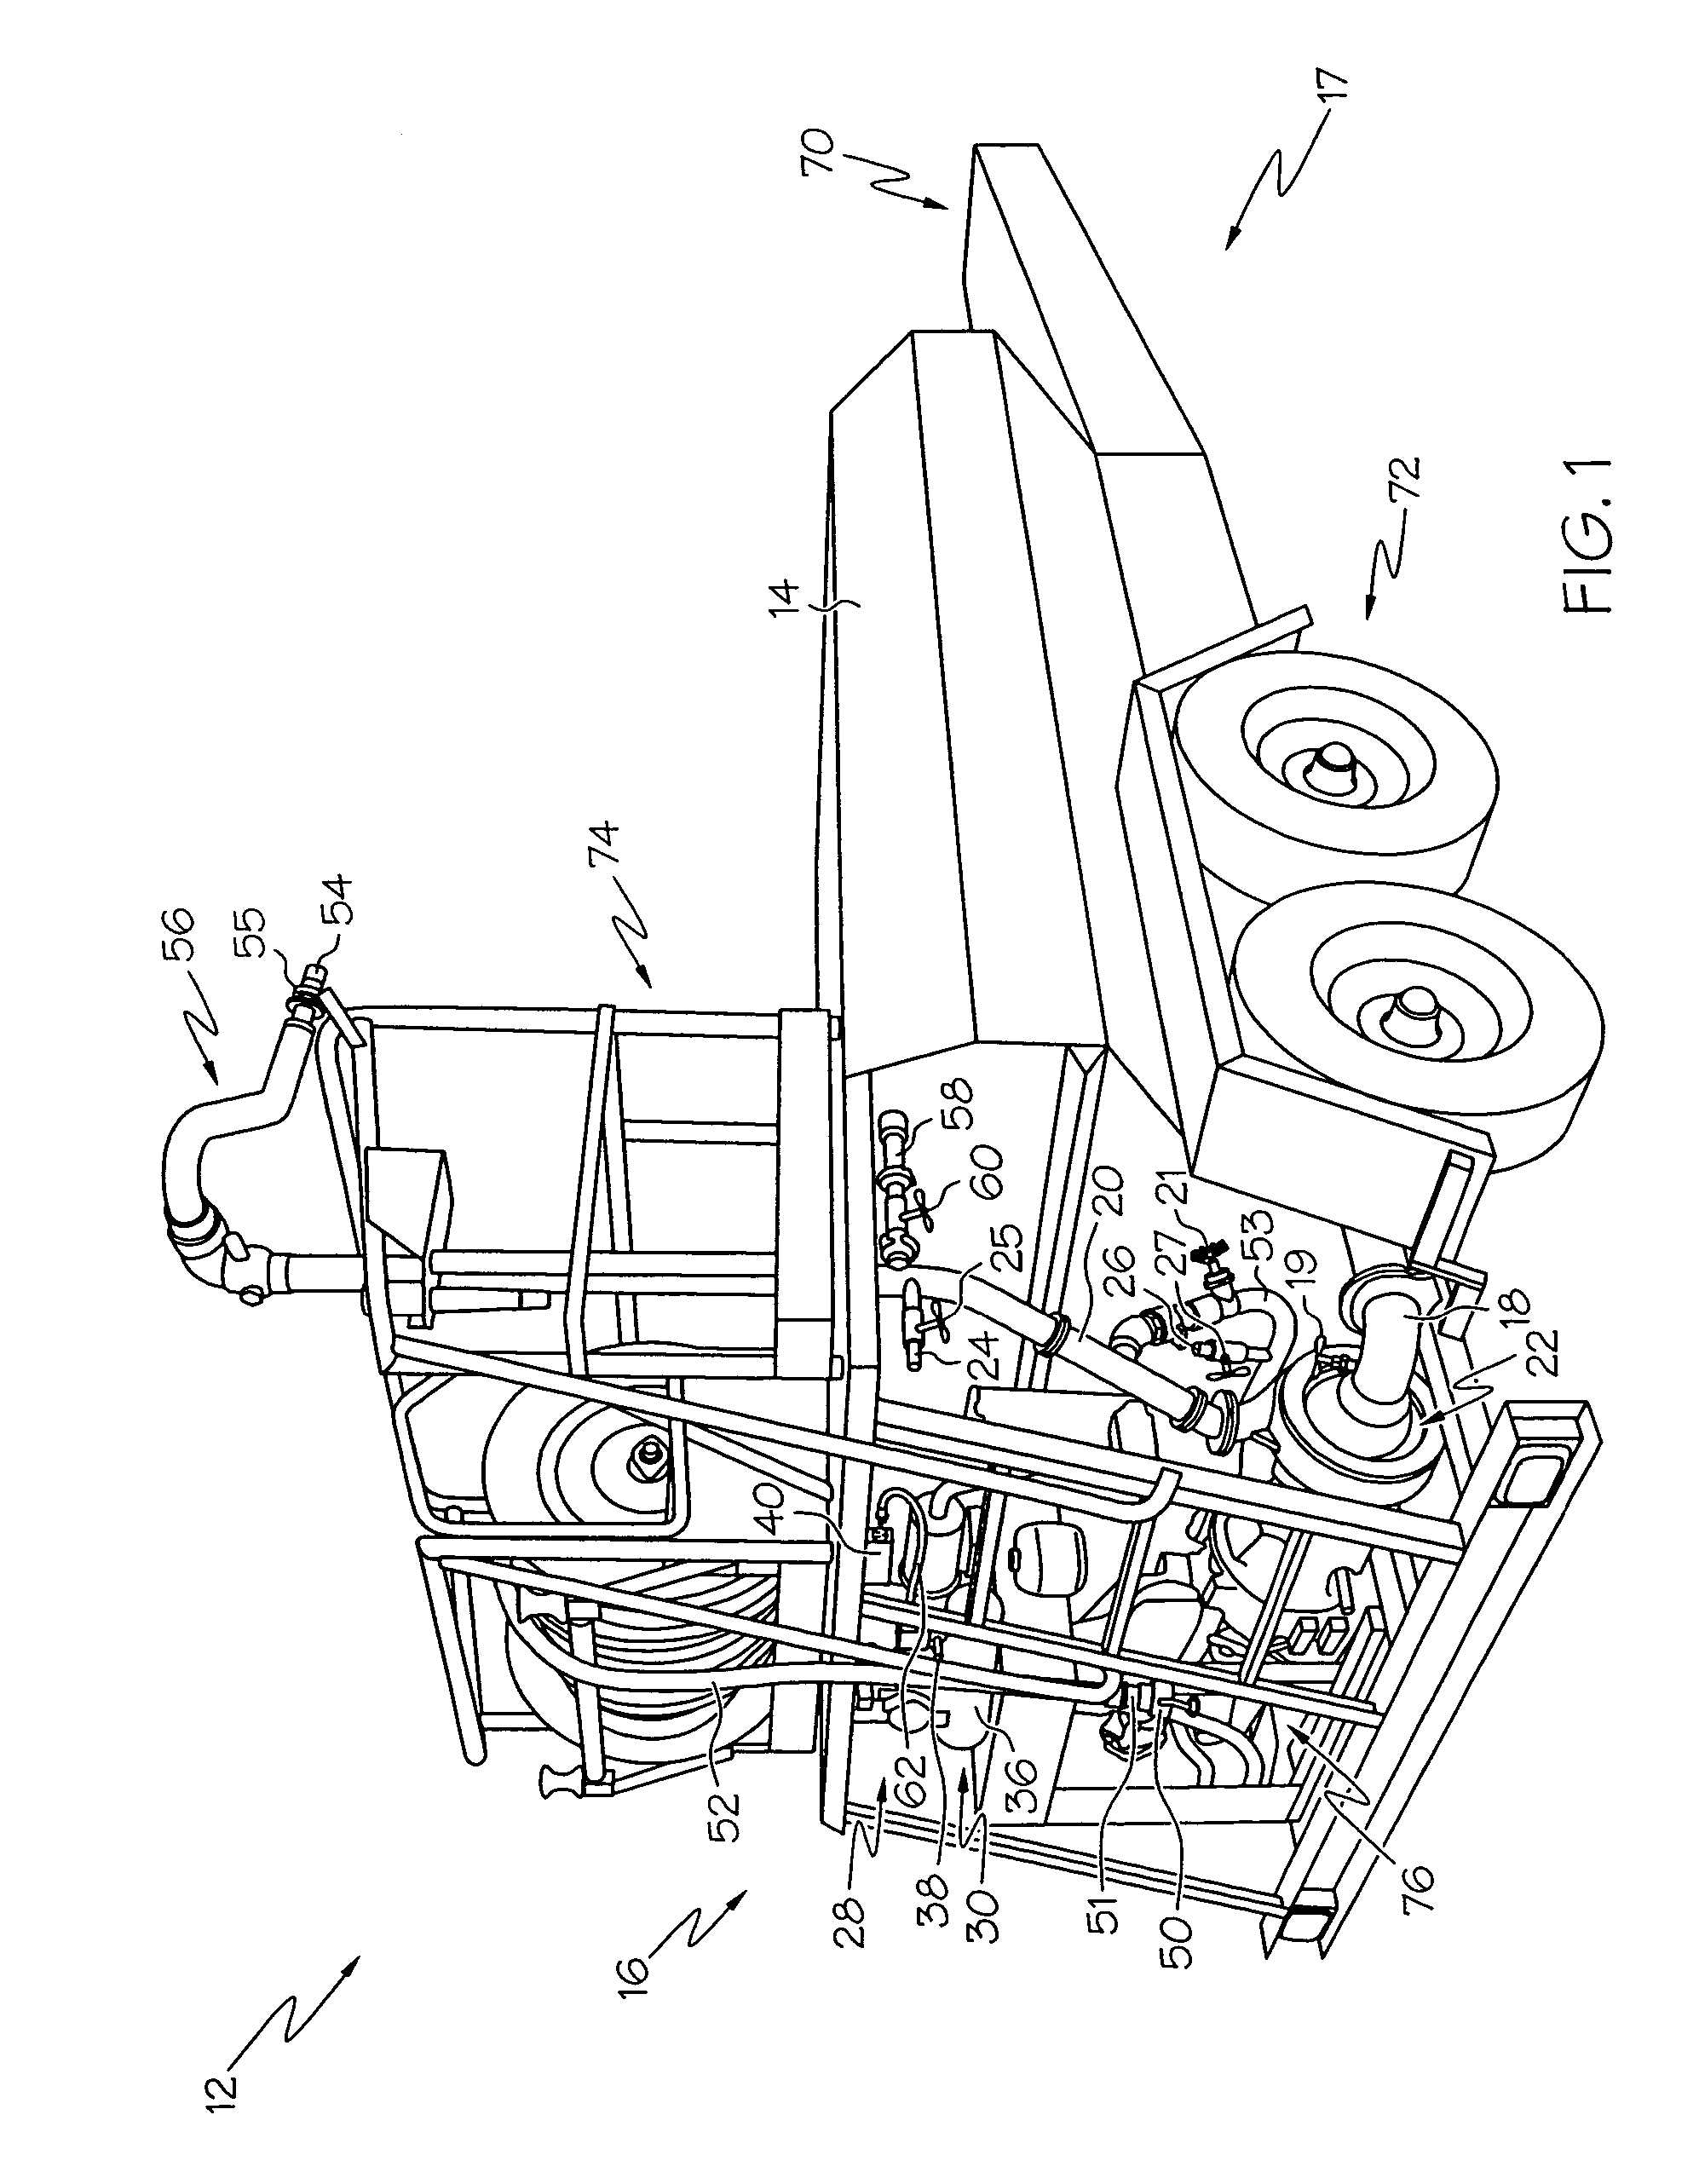 Vehicles and bulk material distributing apparatuses including air flush system and methods